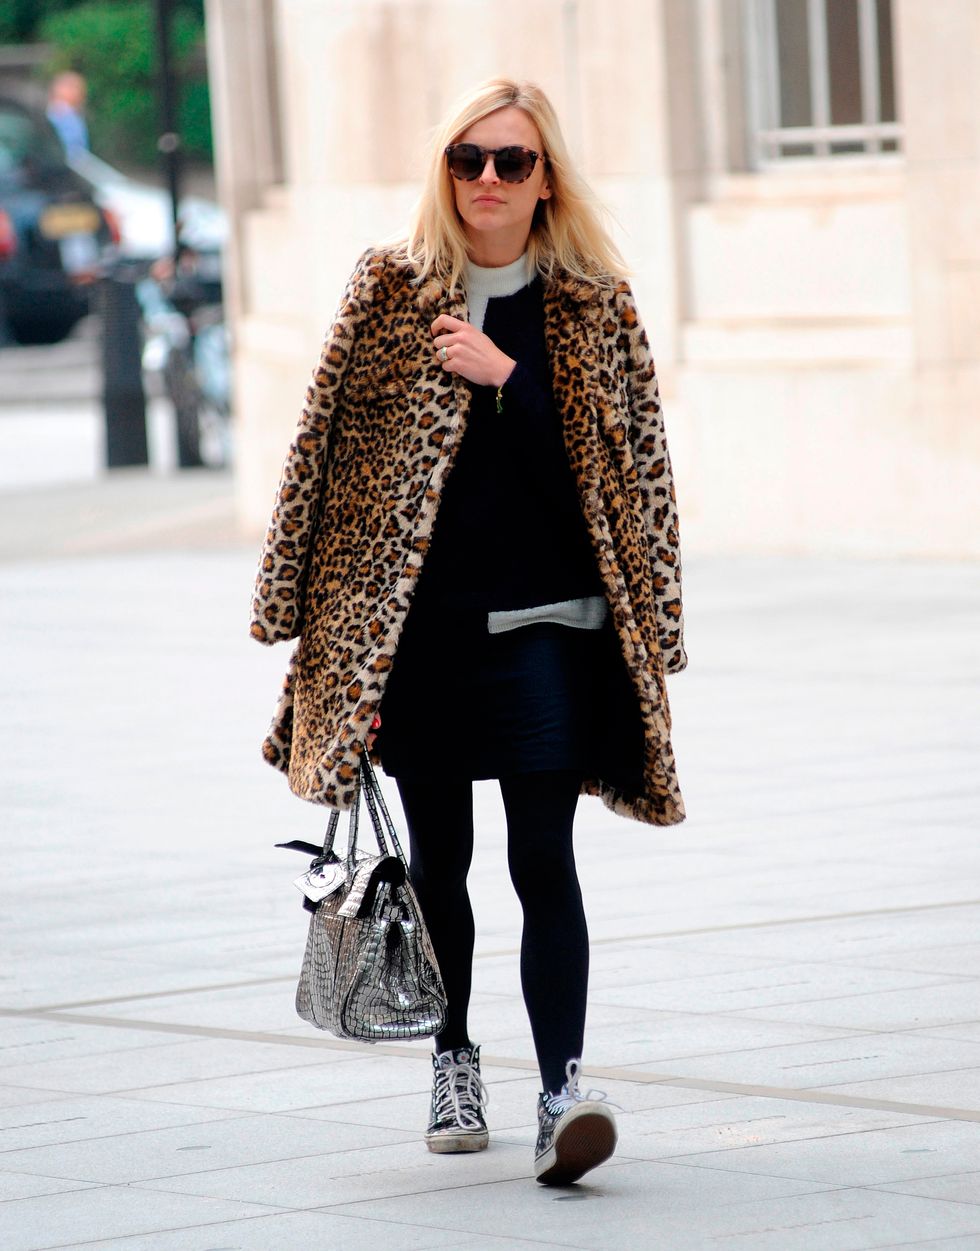 Fearne Cotton shows us how to wear the autumn trends for 2014